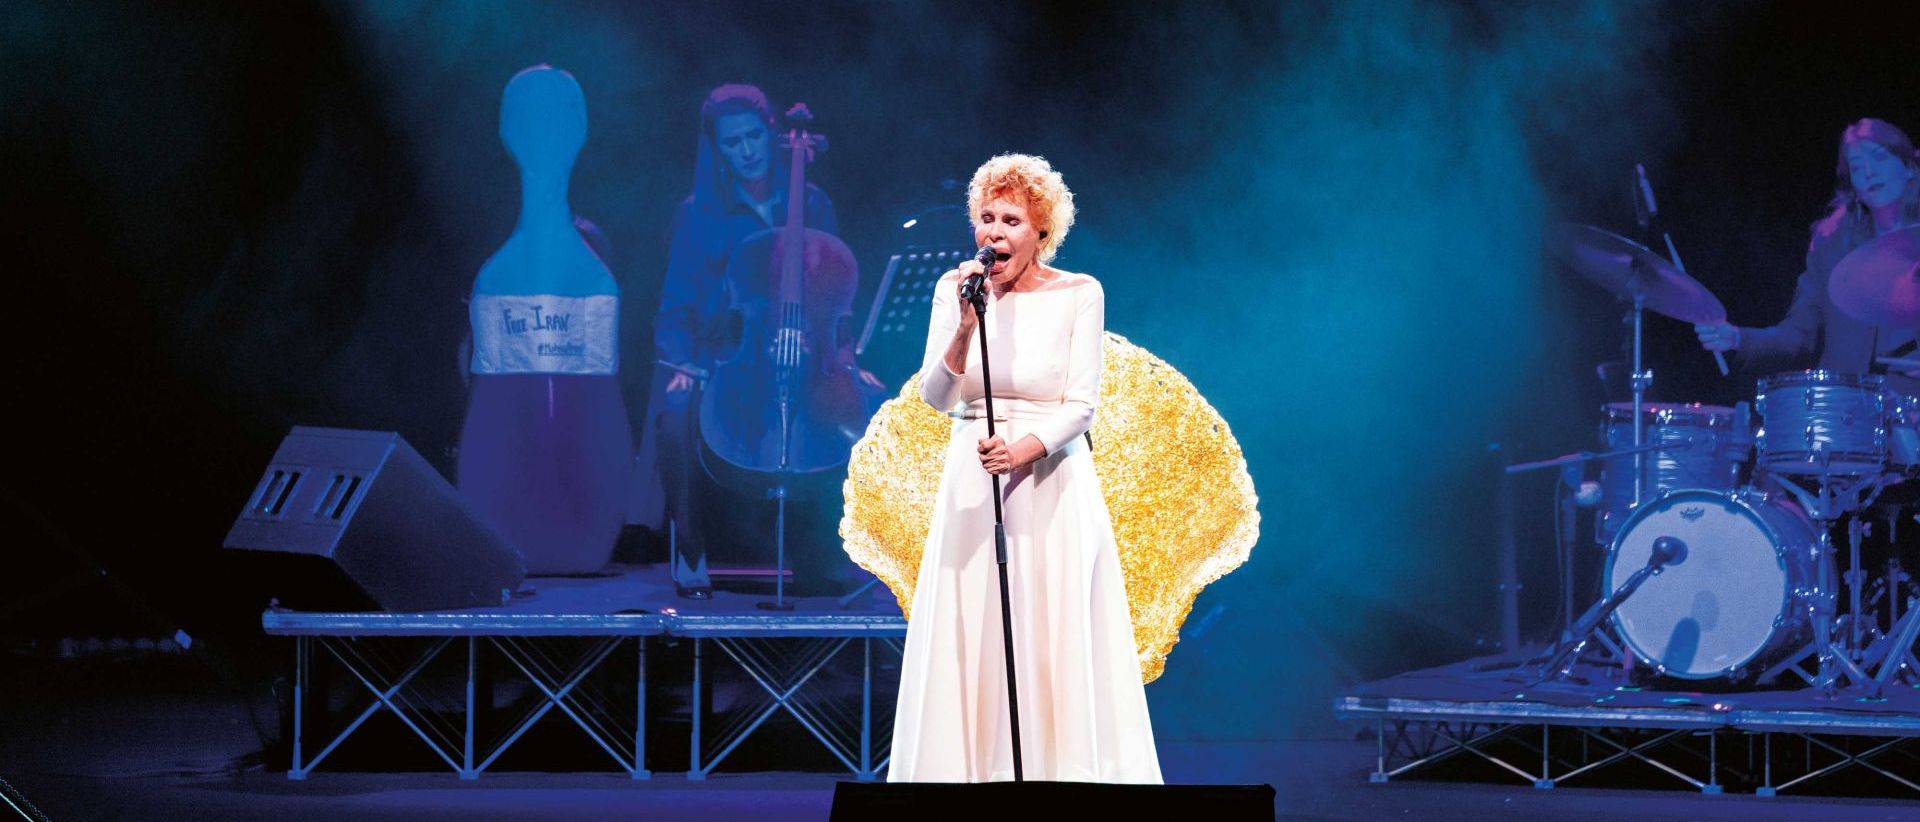  Ornella Vanoni with the Margherita armchair on stage during the Italian tour of “Women and music”, 2022 / 2023. 